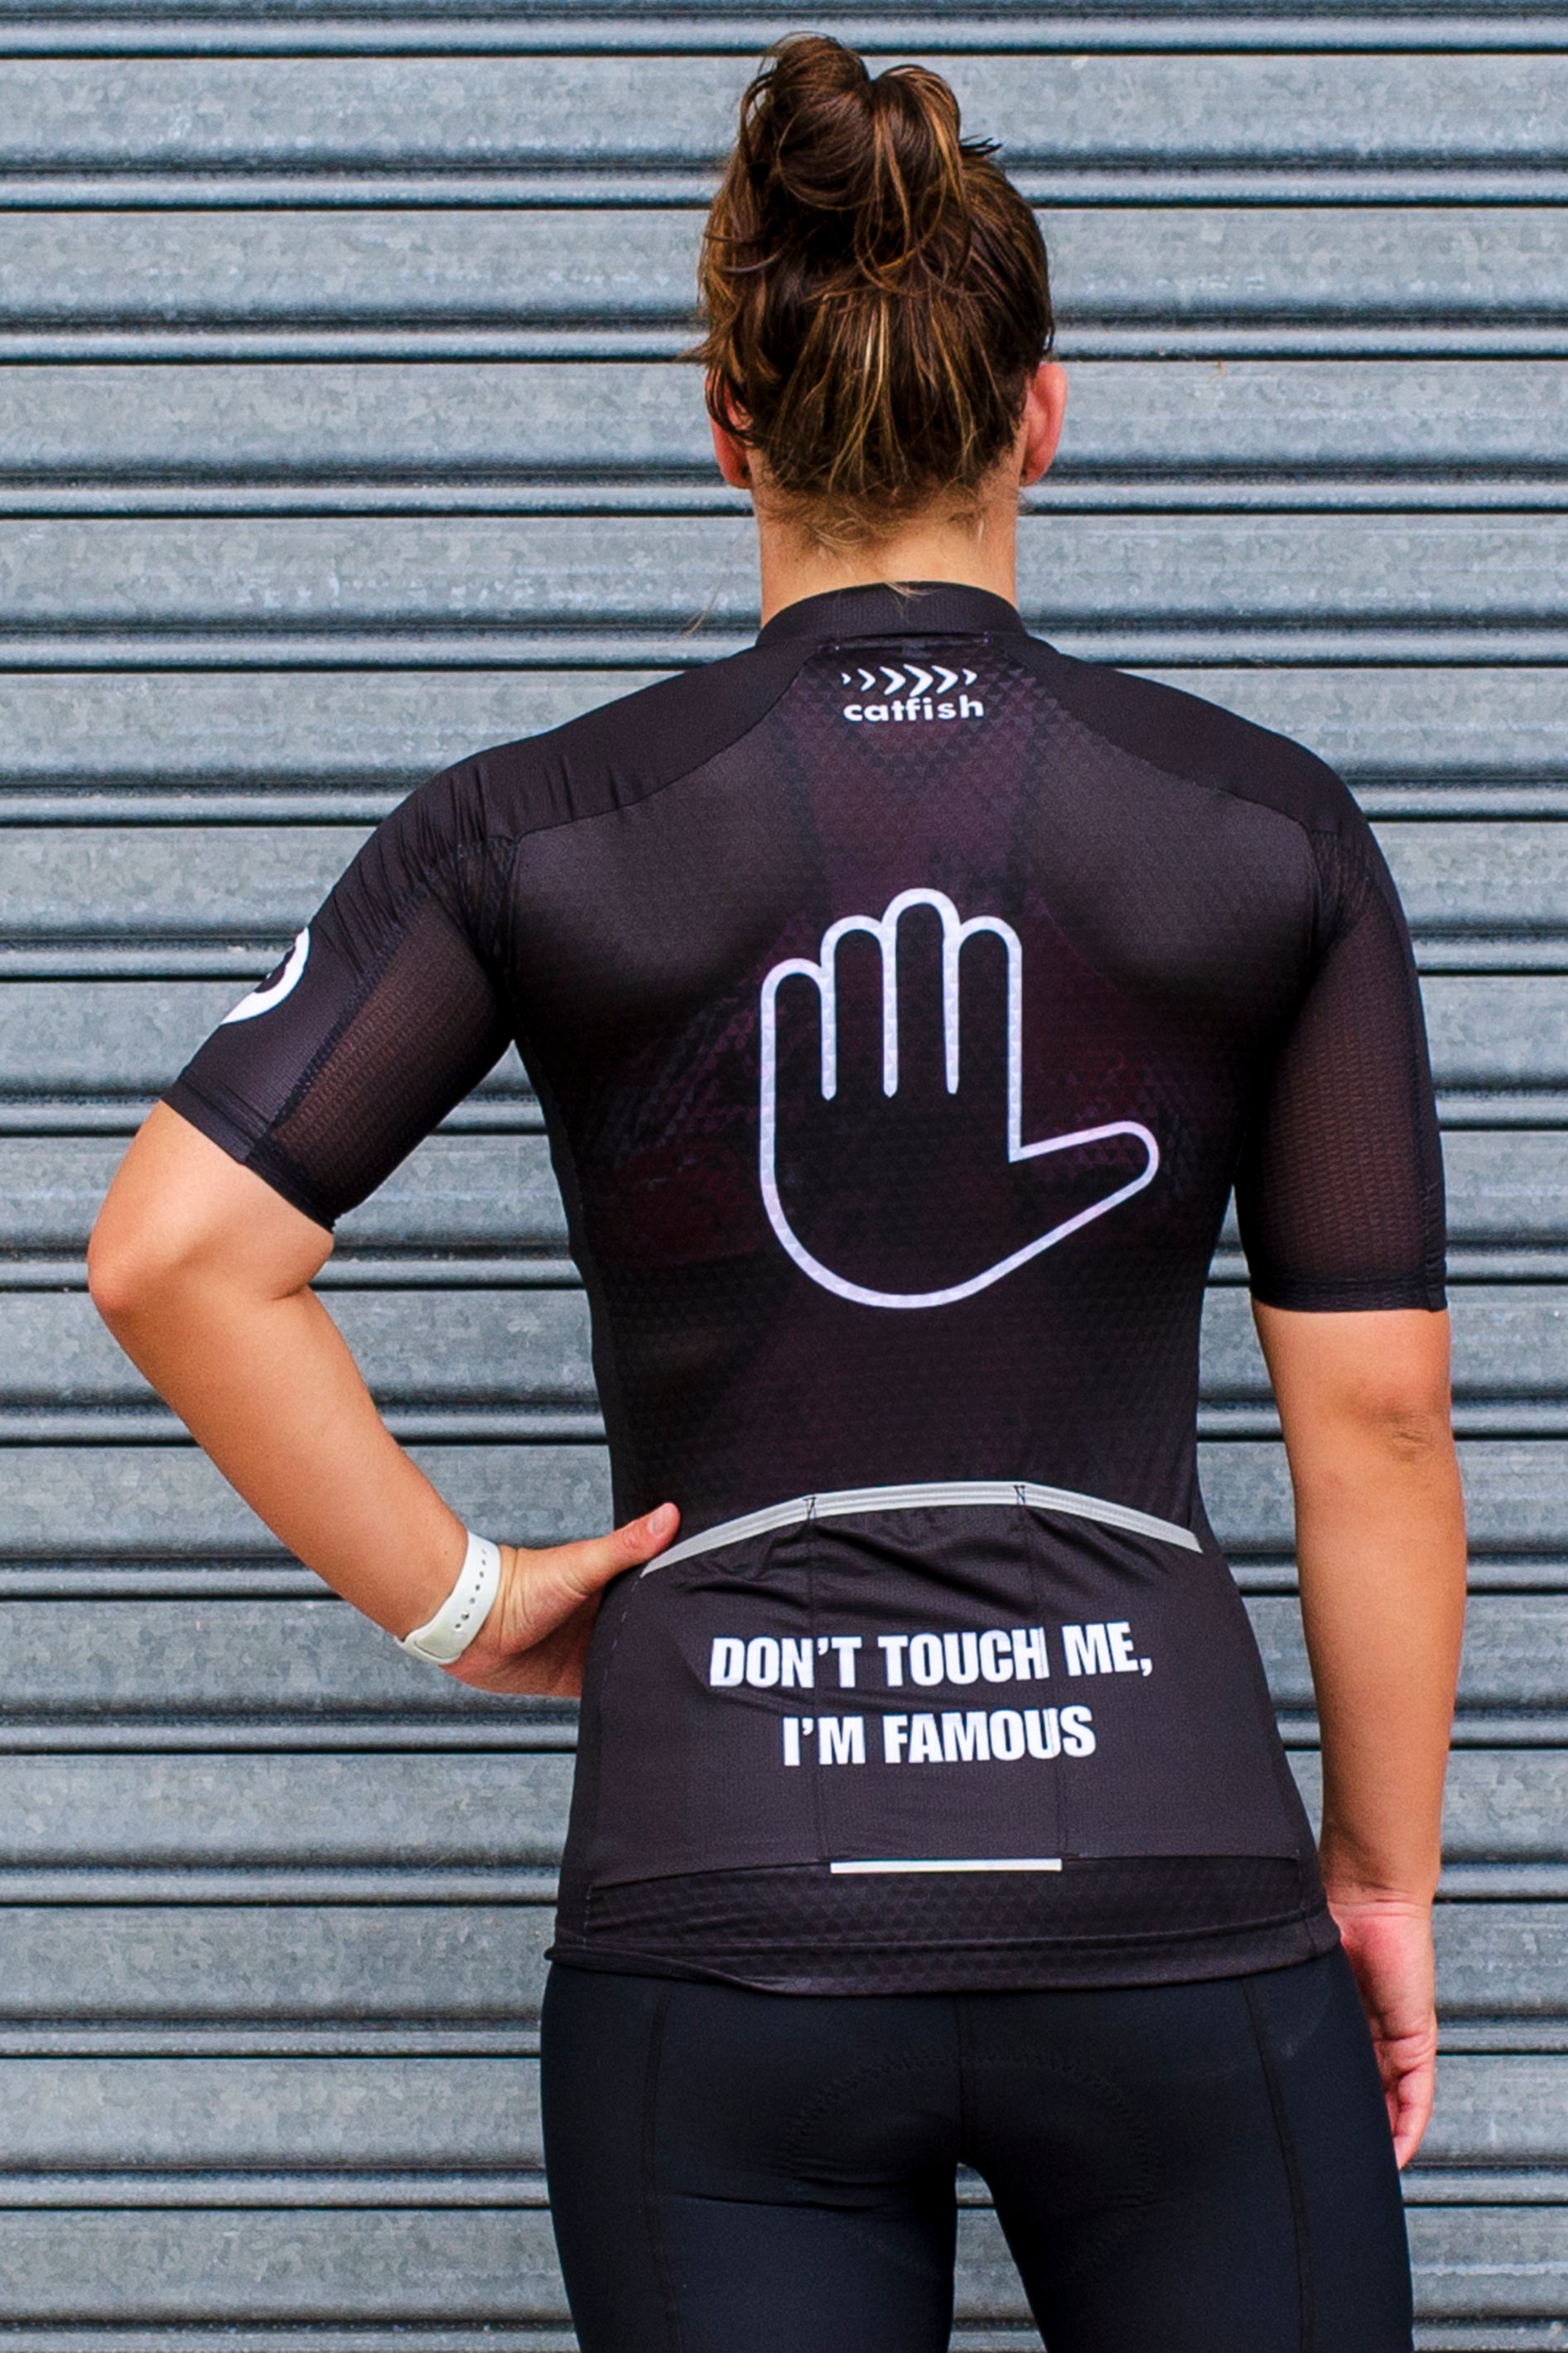 Renee X Catfish "Don't touch me, I'm famous" Cycle Jersey